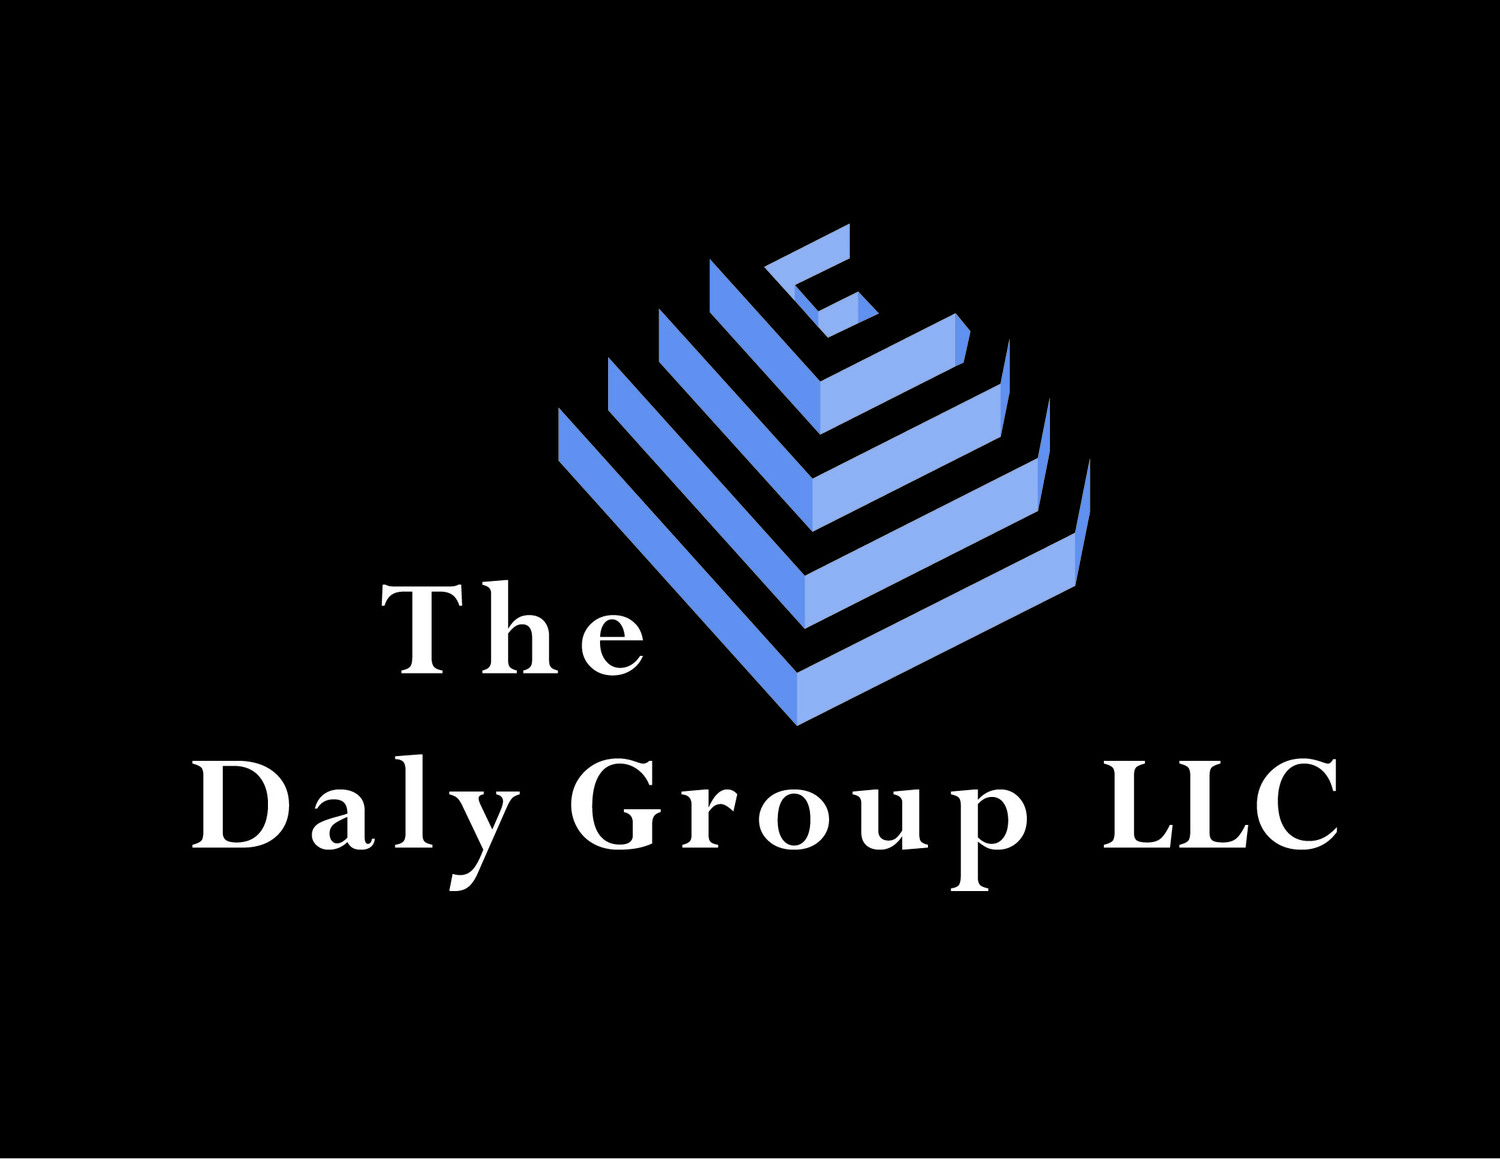 The Daly Group LLC